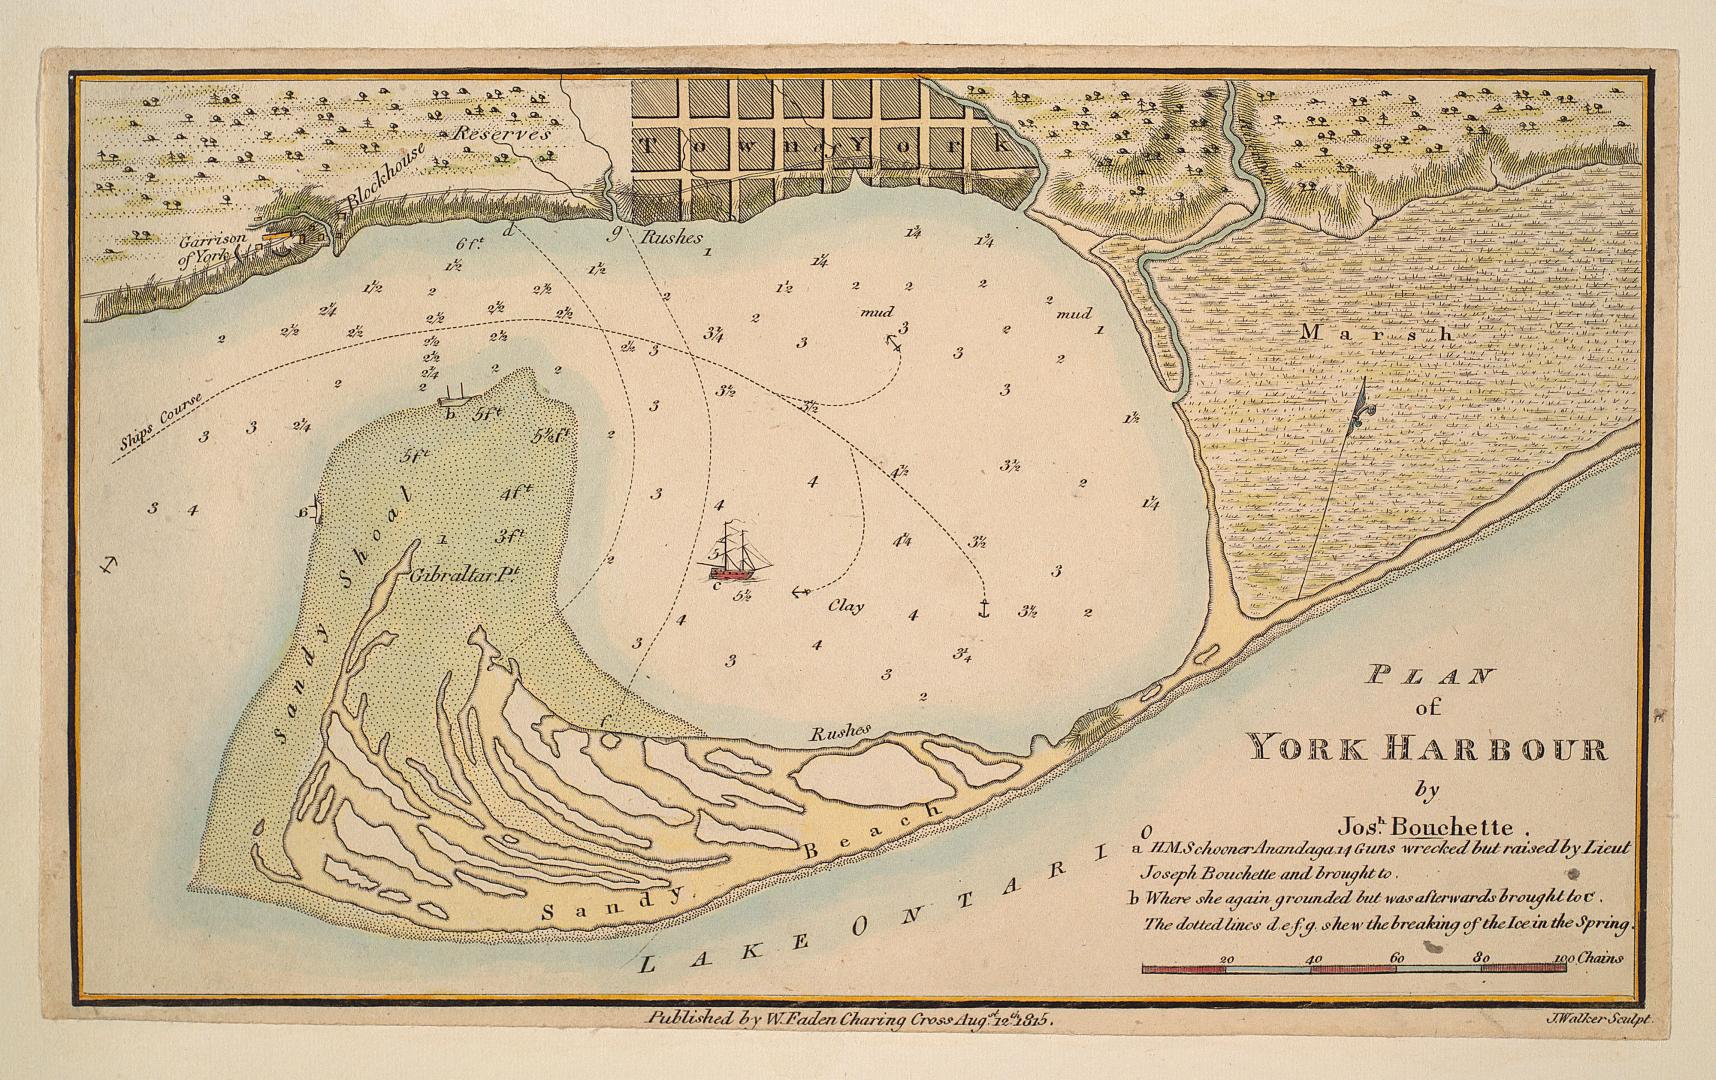 Image shows a map that reads: "Plan of York Harbour".